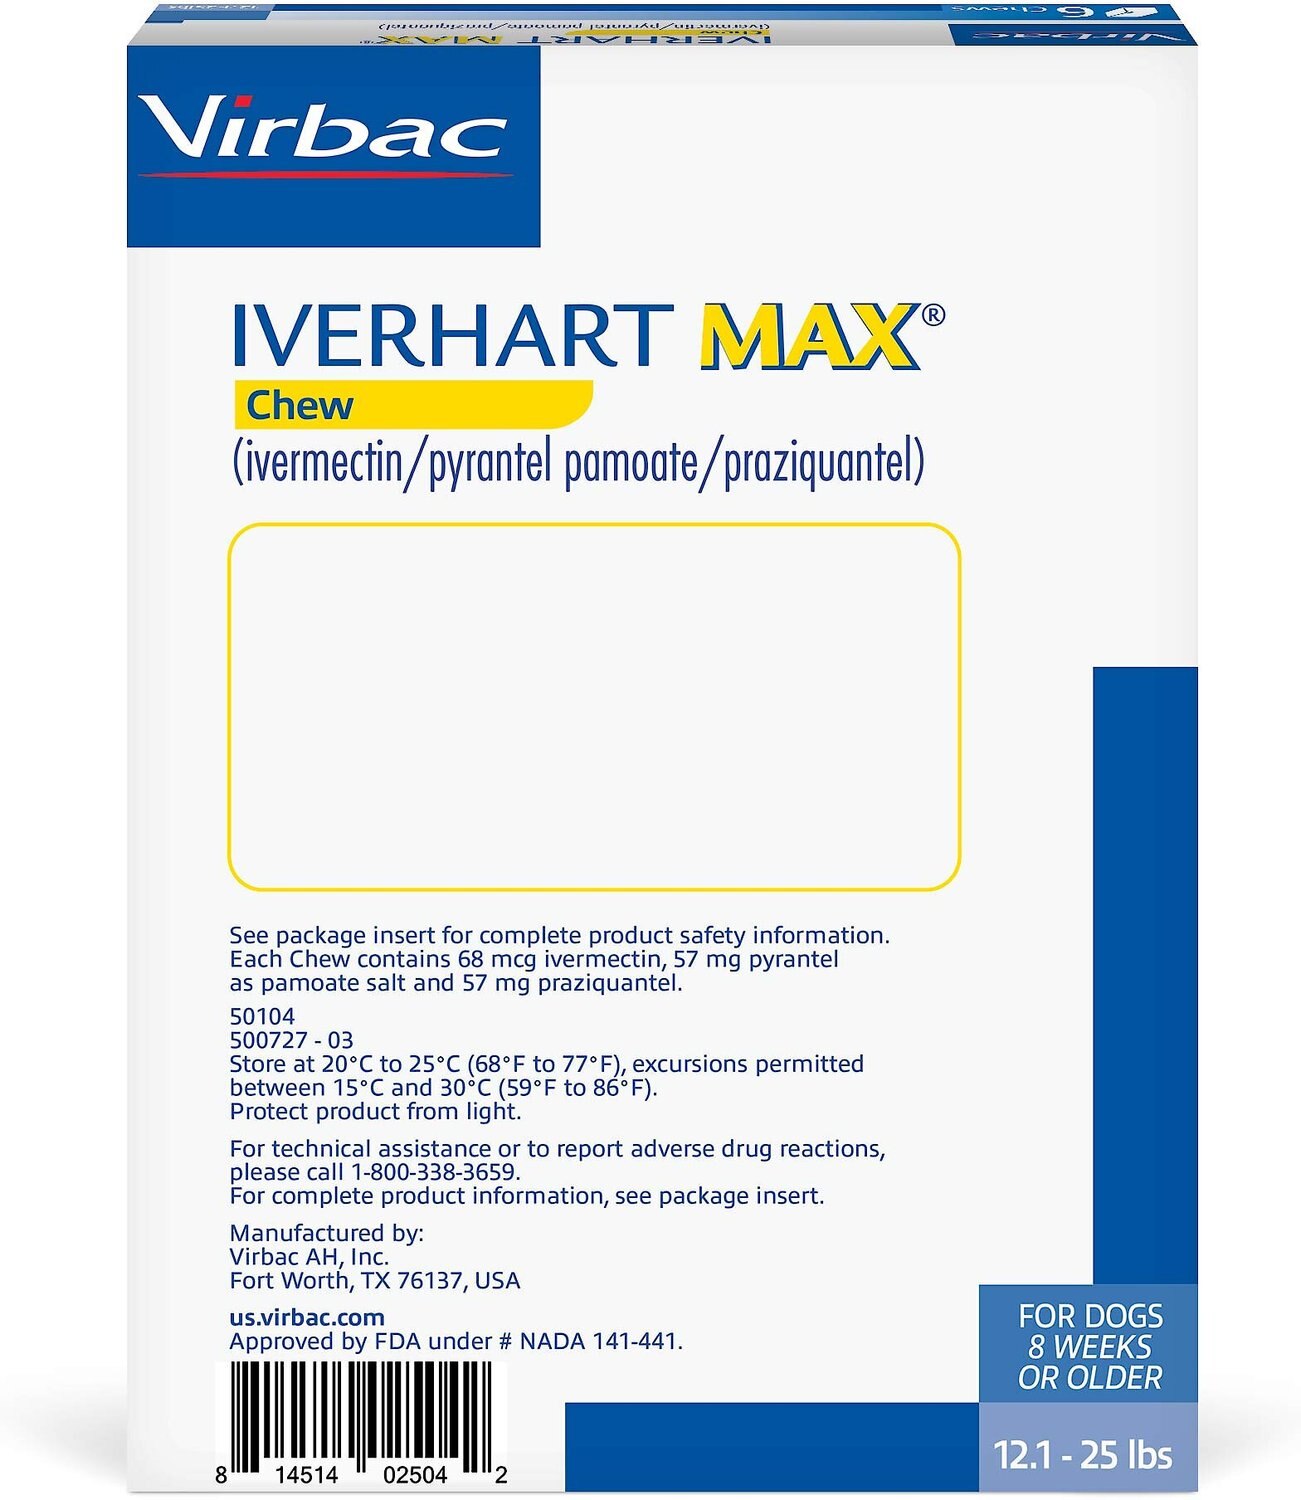 iverhart-max-soft-chew-12-1-25-lbs-6-treatment-blue-box-chewy